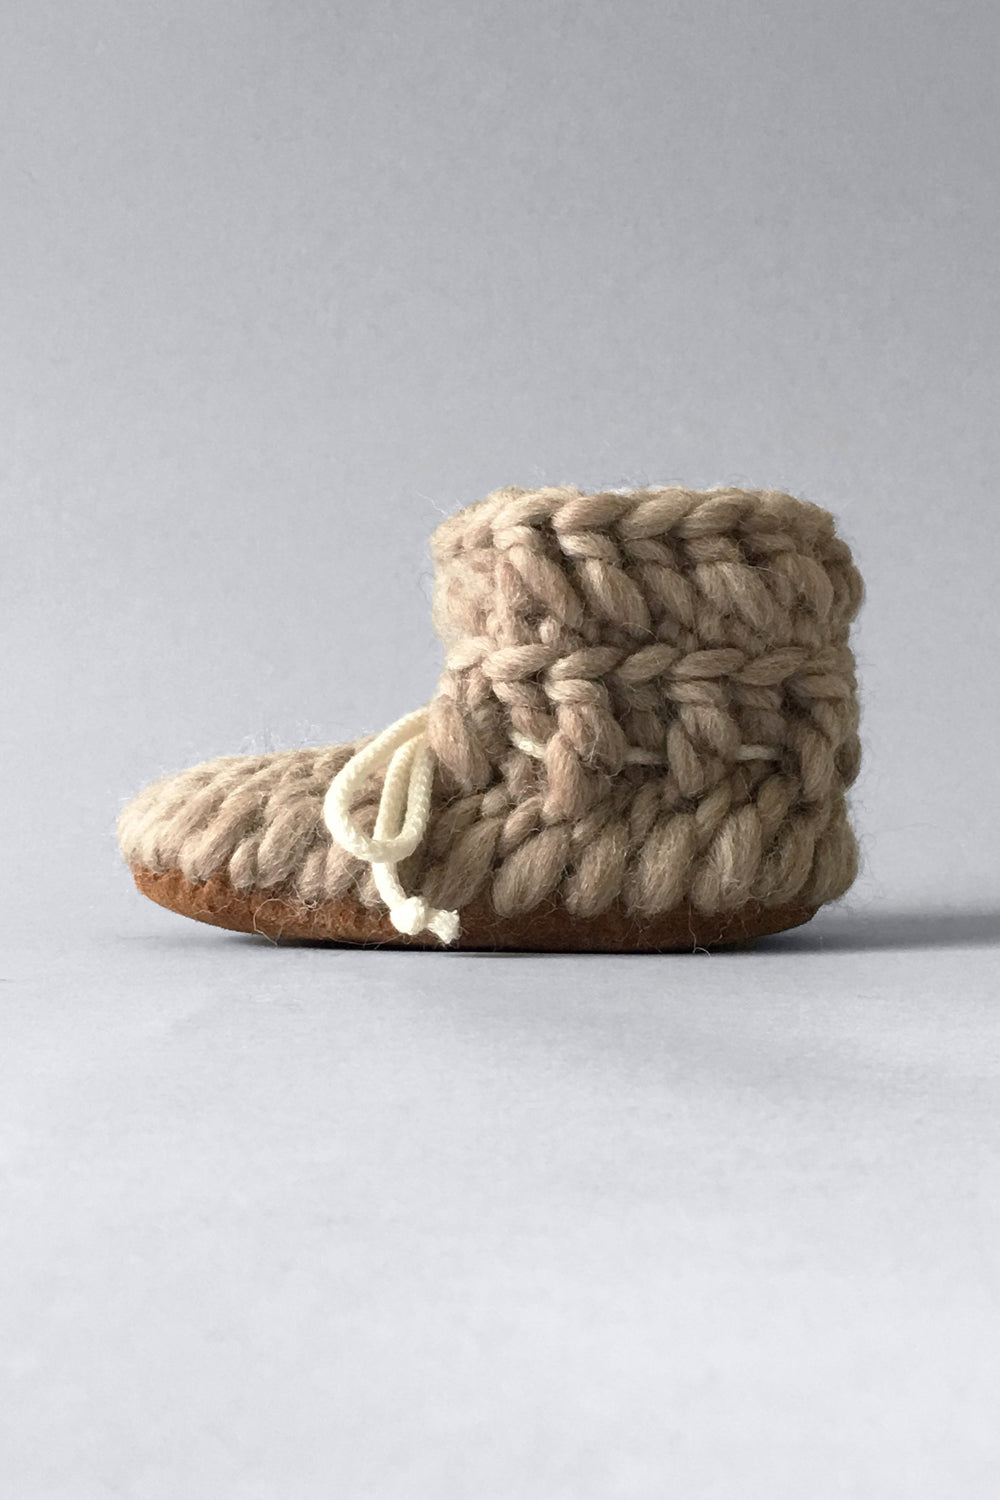 Crochet beige wool baby shoes with leather soles, handmade in Canada